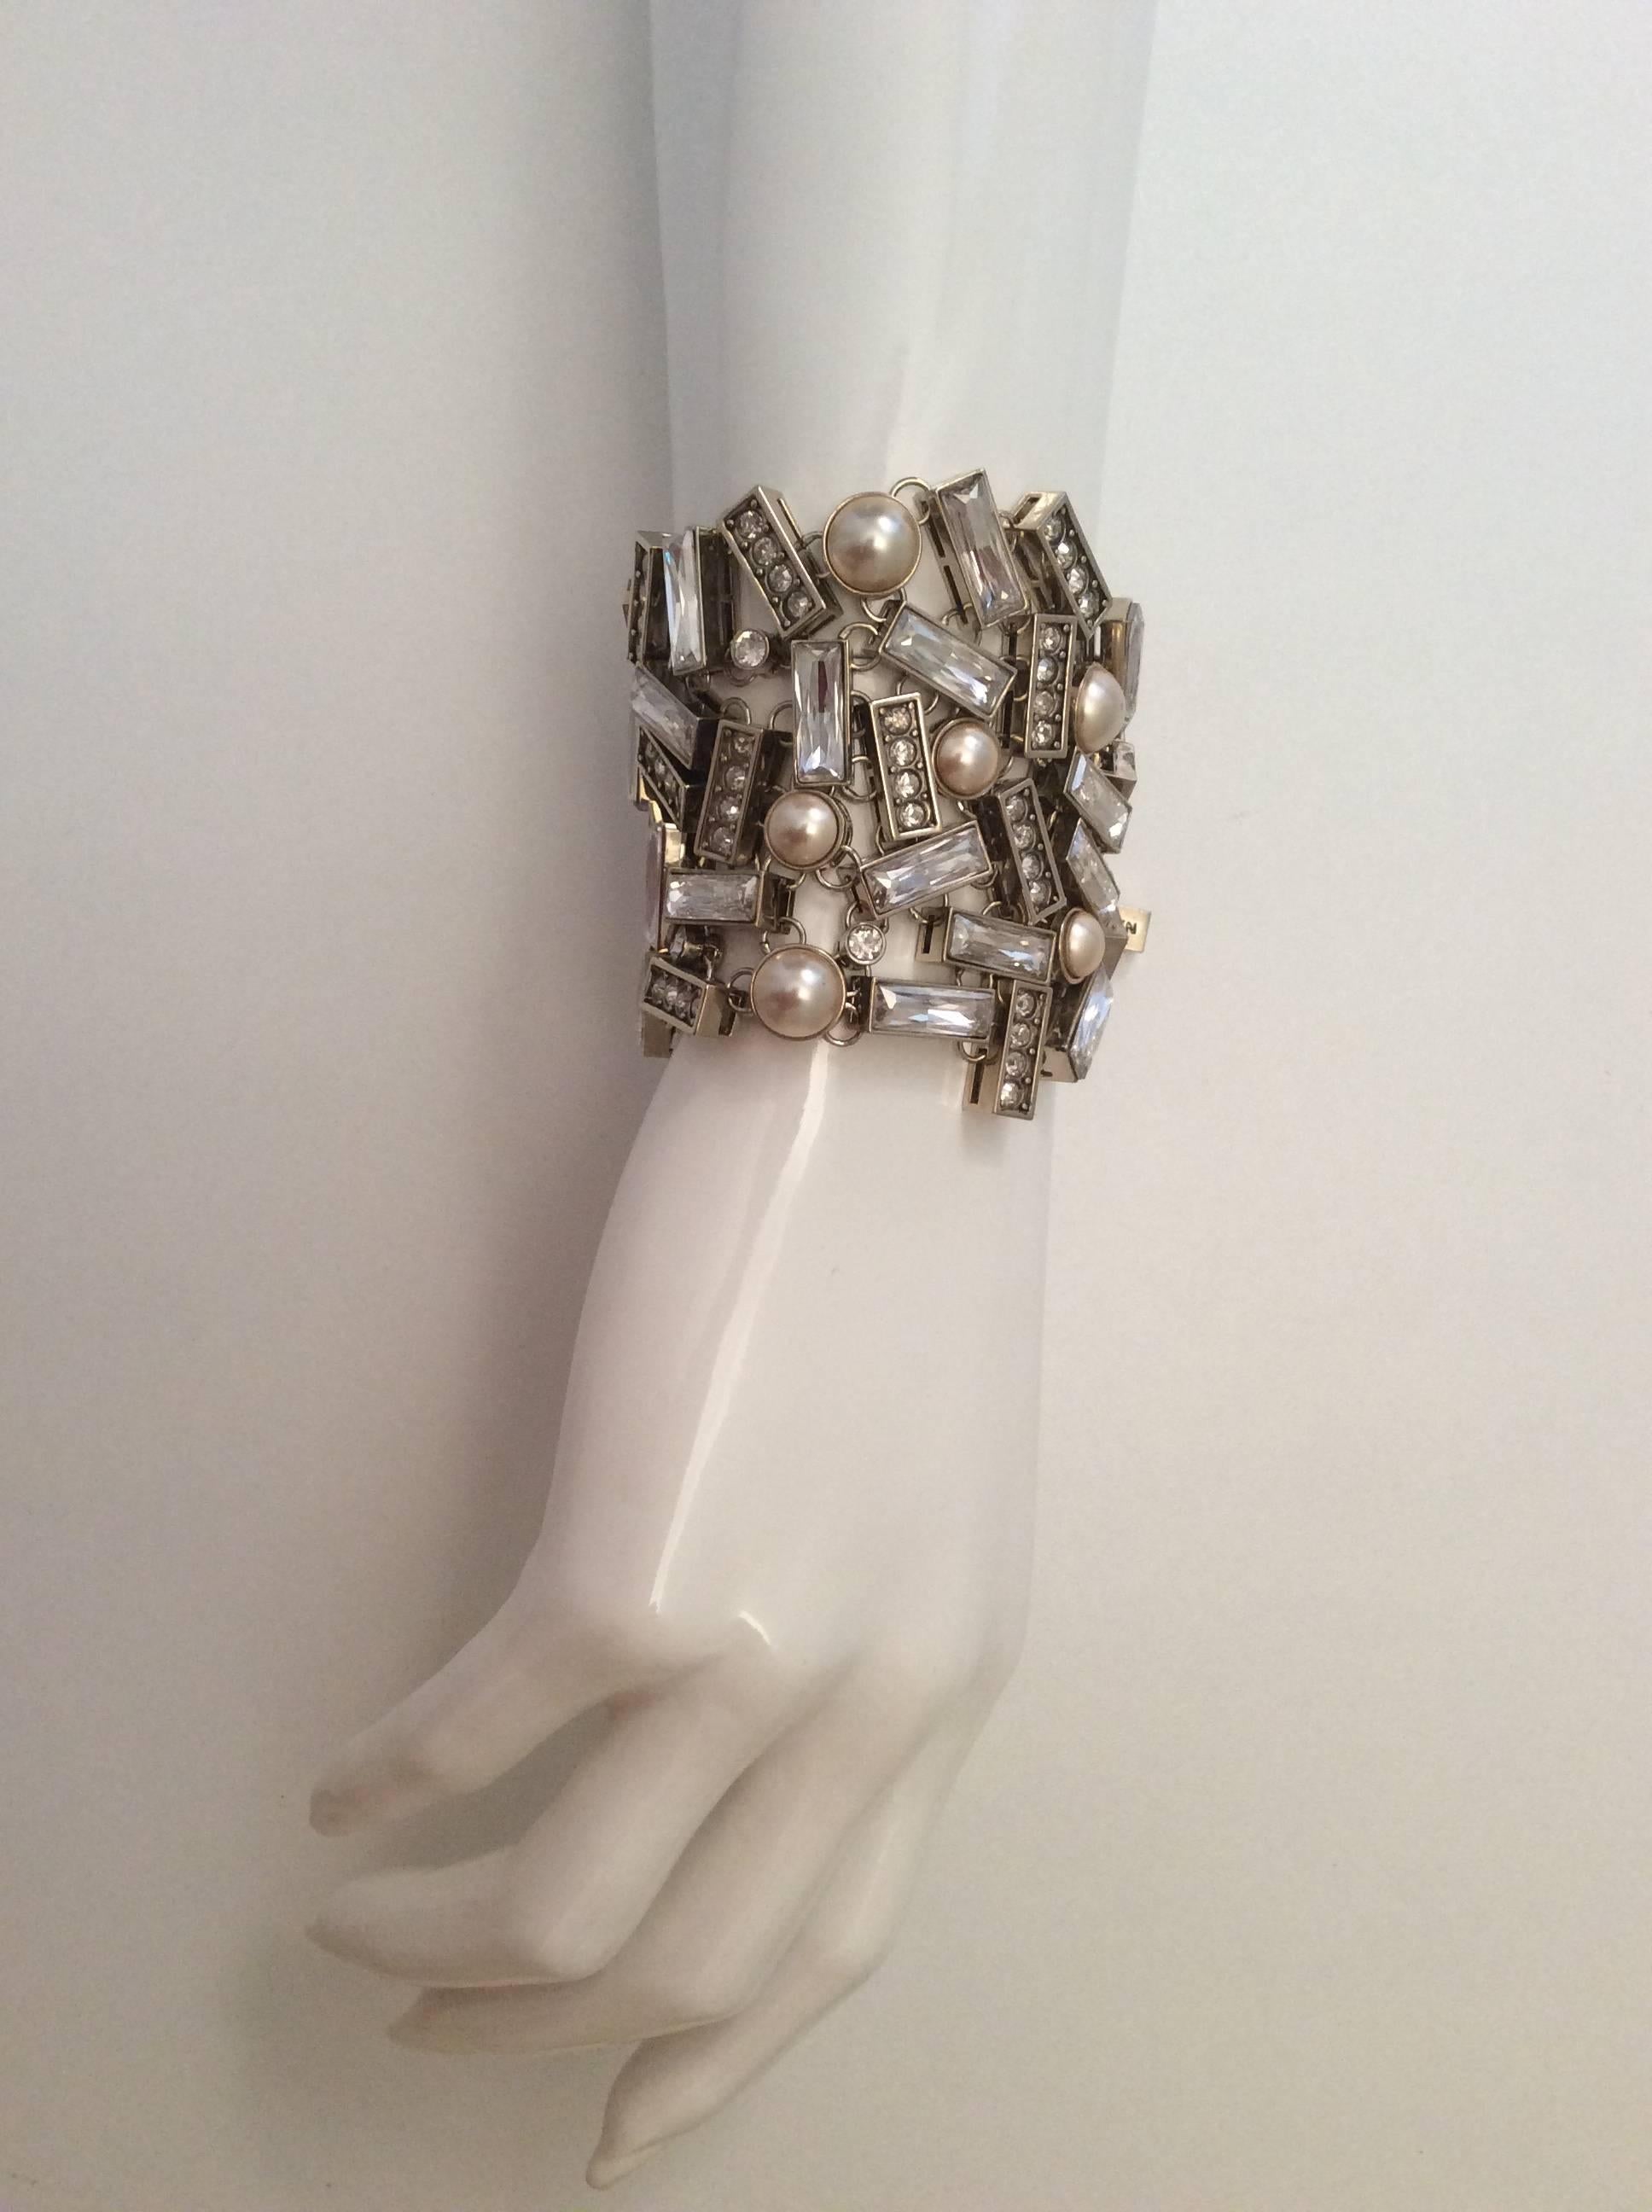 Presented here is a magnificent runway bracelet from St. John. The bracelet is a series of rhinestones and pearls encased in rectangular and circular shapes. There are long baguettes and circular rhinestones. The bracelet has a silver tone clasp